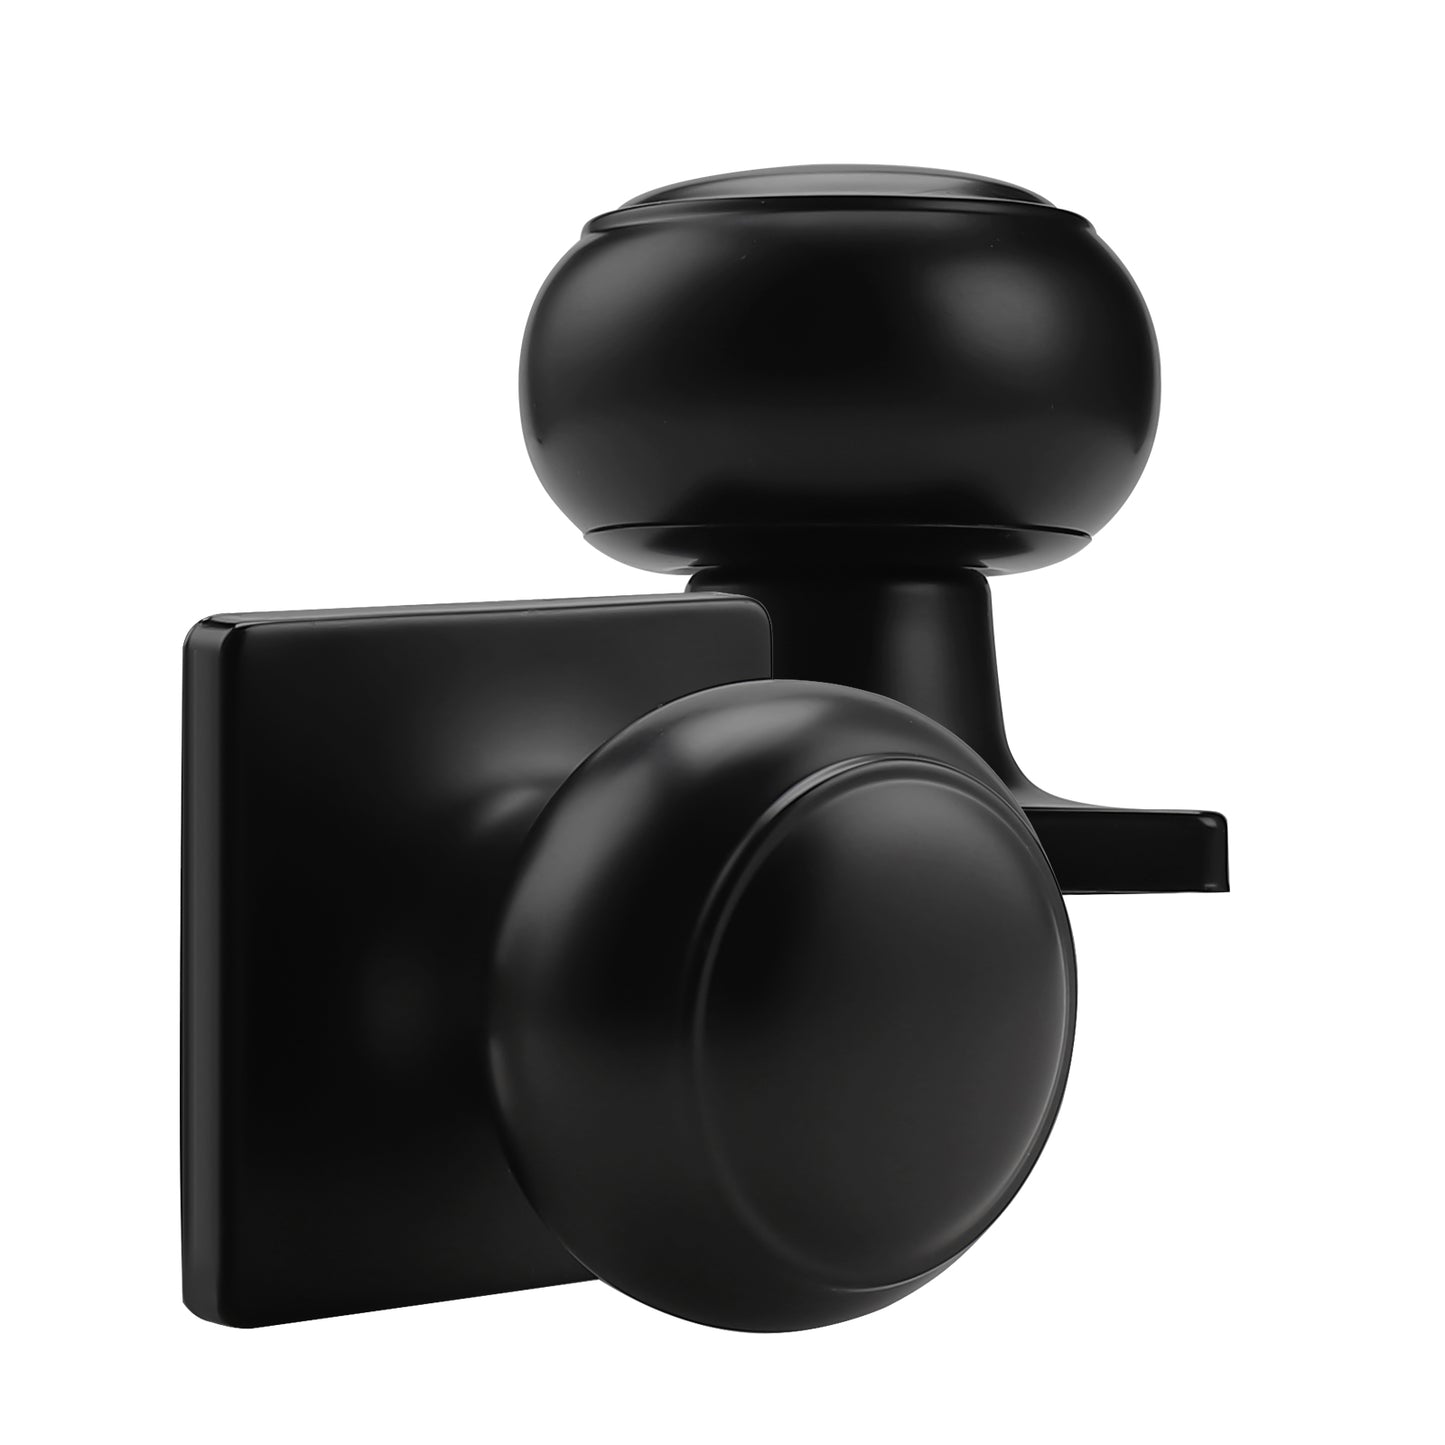 Flat Ball Knob with Square Rosette, Passage Door Knobs Black Finish DLS09BKPS - Probrico